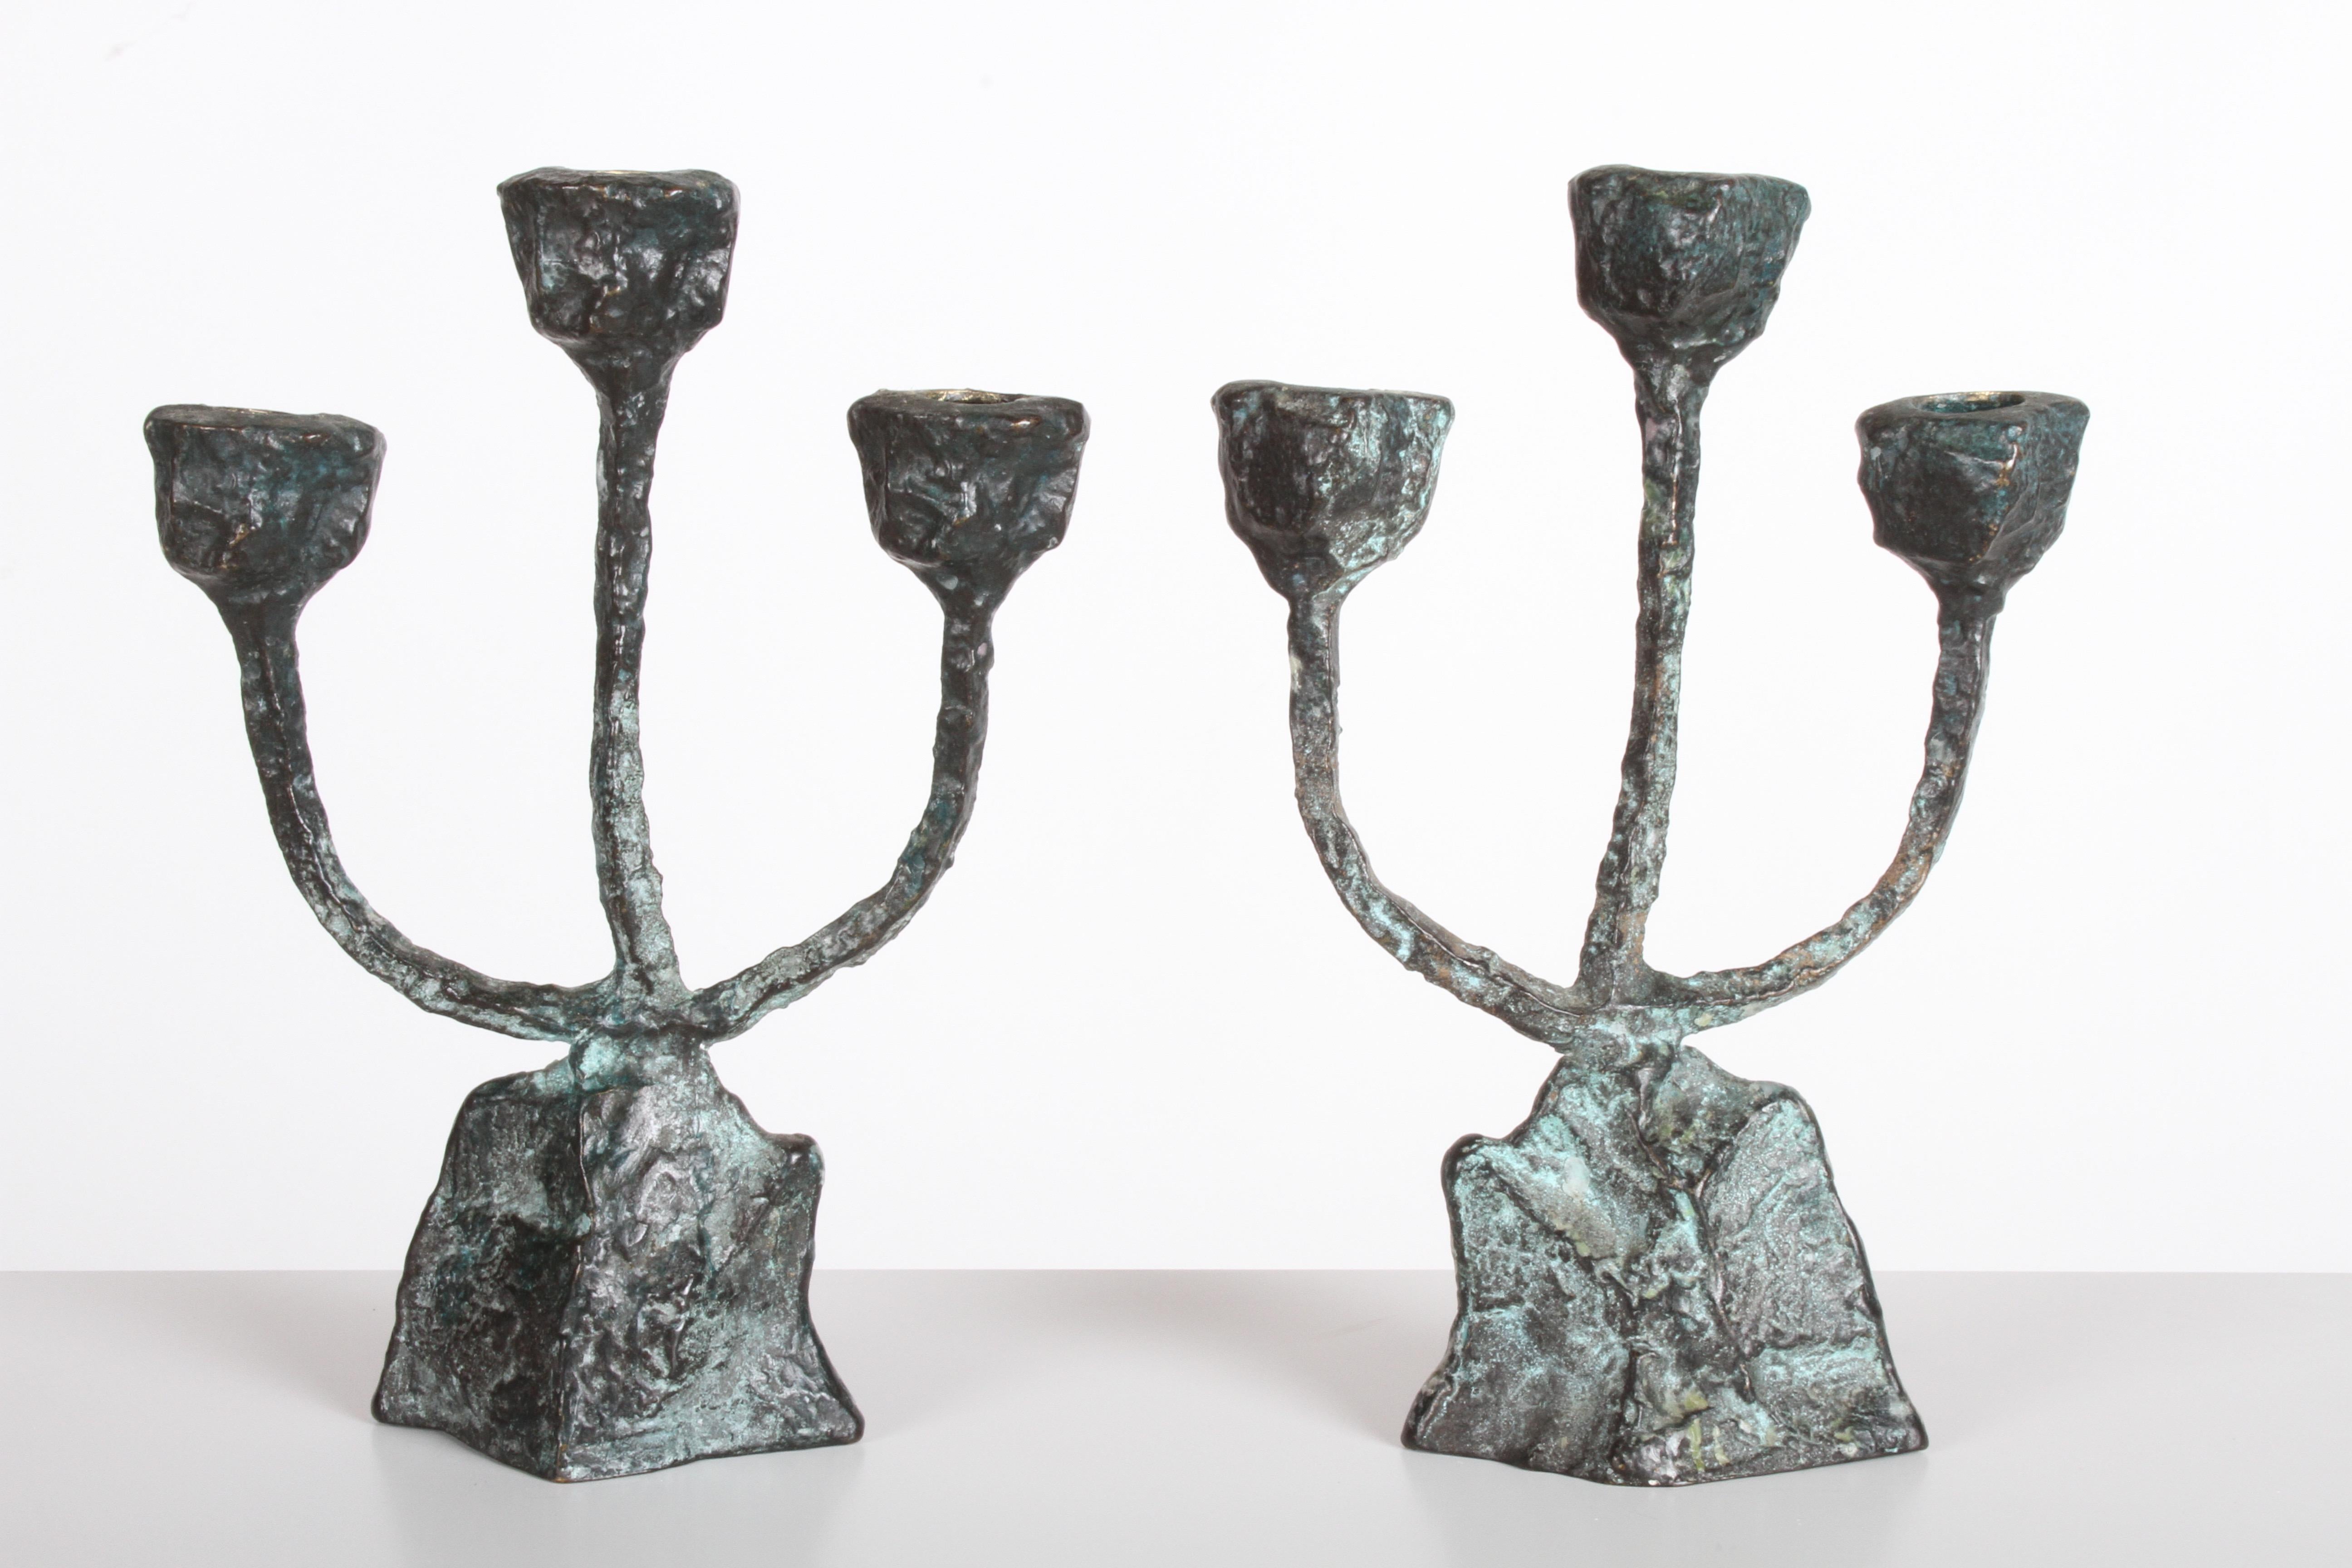 Pair of bronze patinated brutalist form candleholders or candlesticks in the style of Giacometti. Nice original condition. Some old wax residue on bases.